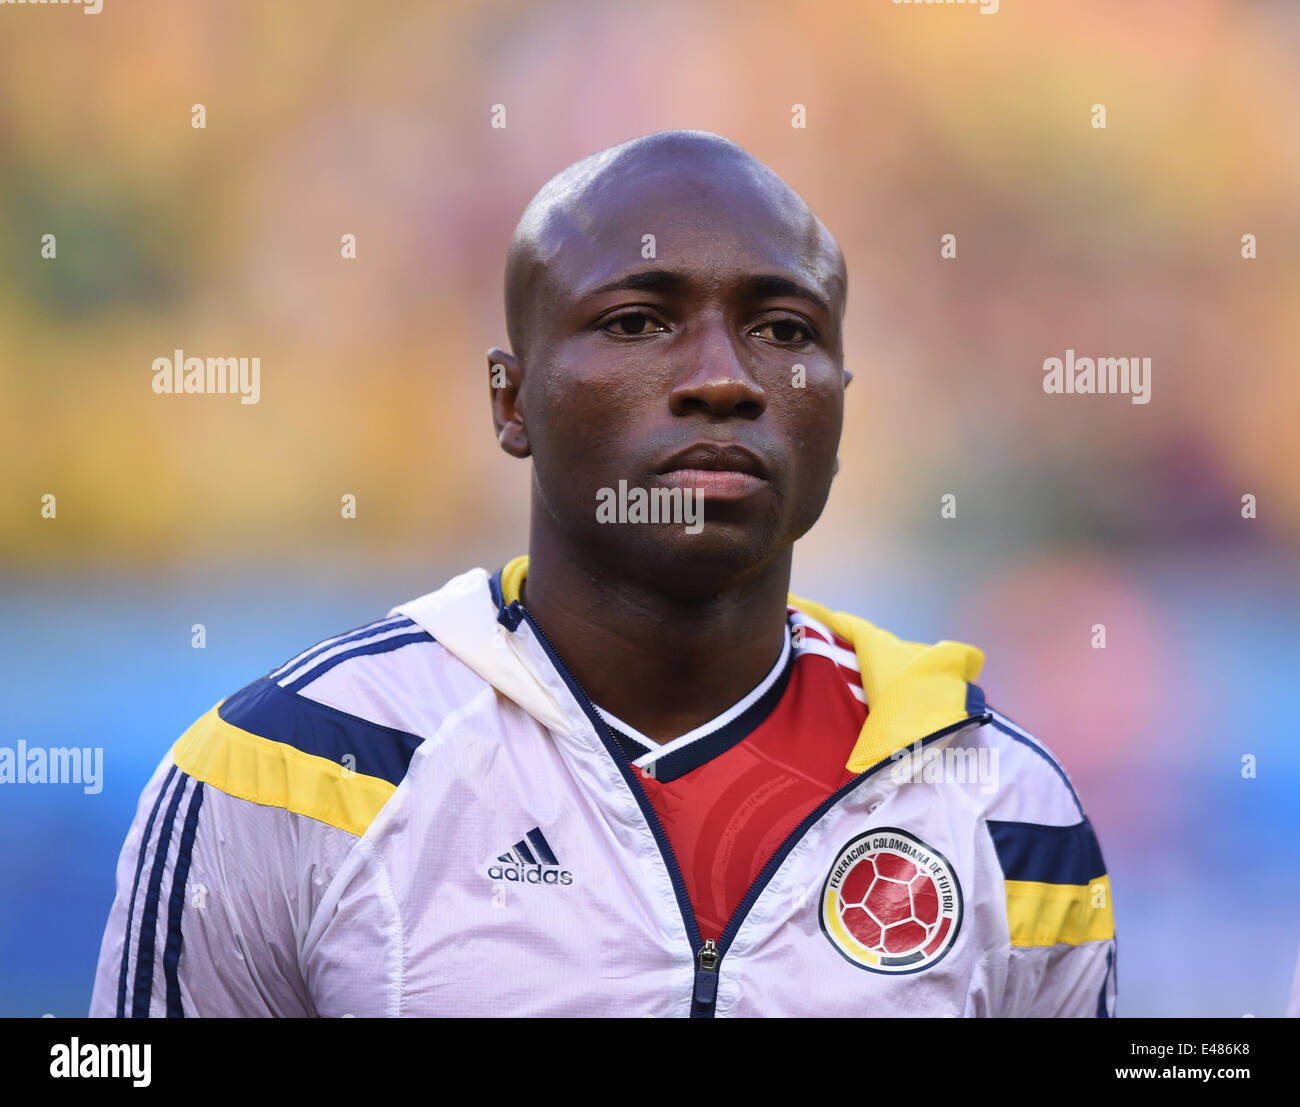 Fortaleza, Brazil. 04th July, 2014. Pablo Armero of Colombia seen during the FIFA World Cup 2014 quarter final match soccer between Brazil and Colombia at the Estadio Castelao in Fortaleza, Brazil, 04 July 2014. Photo: Marius Becker/dpa/Alamy Live News Stock Photo